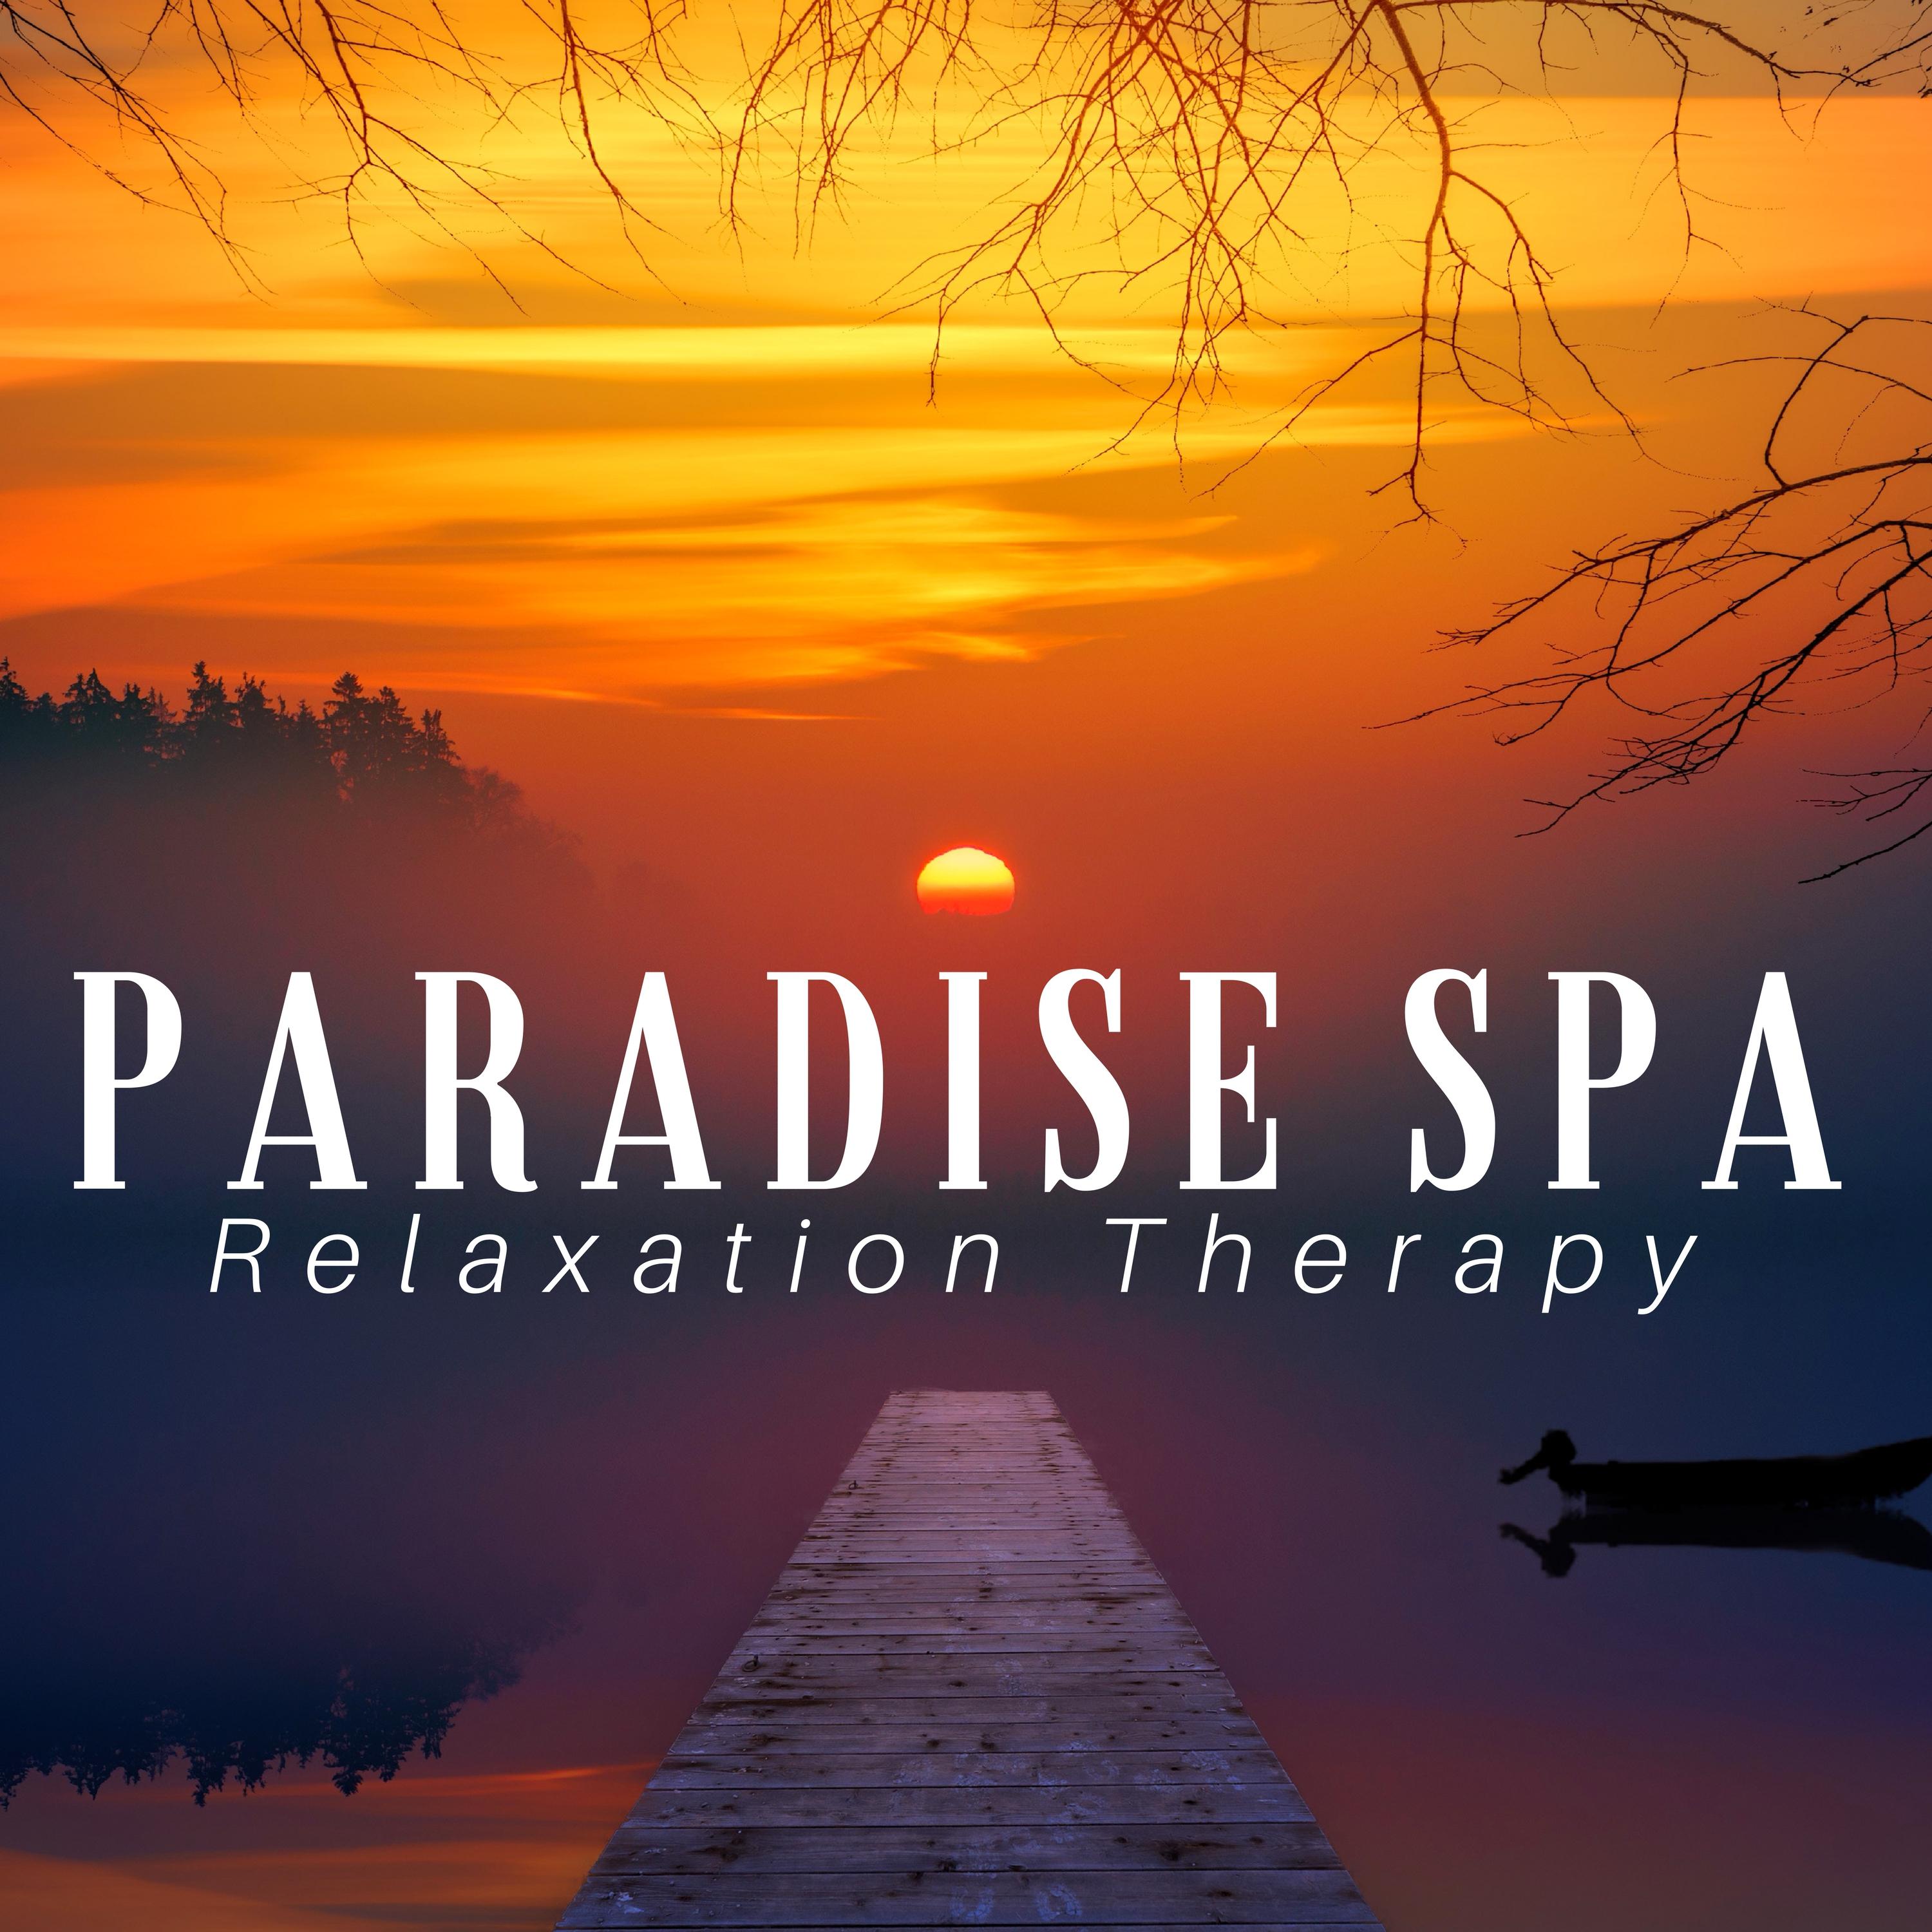 Paradise Spa: Relaxation Therapy, Relaxing Soothing Music for Mind & Body, Wellness, Your Comfort